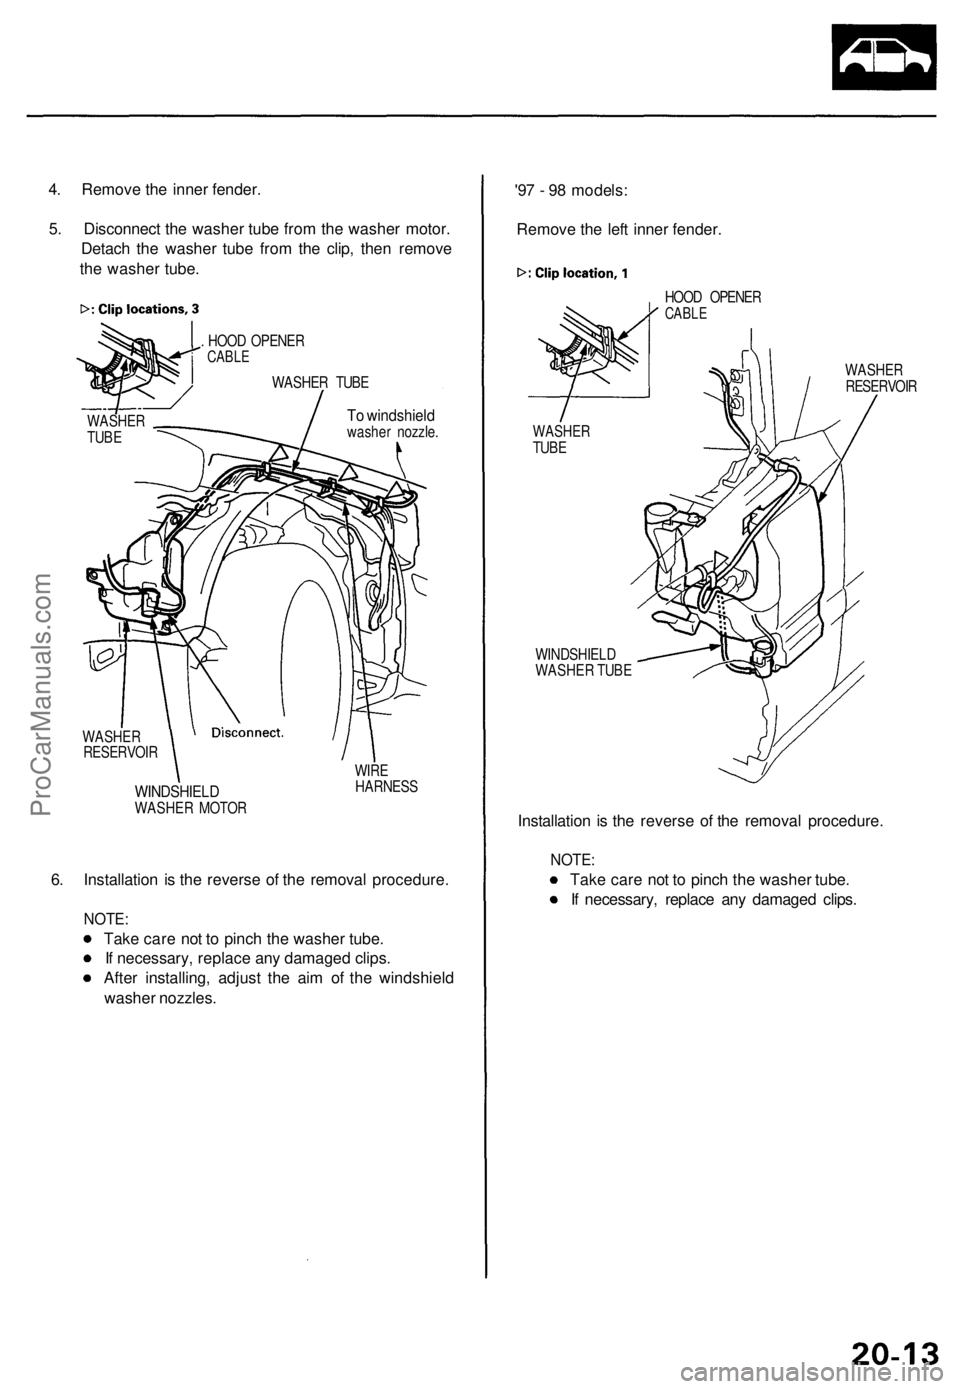 ACURA TL 1995  Service Repair Manual 
4. Remove the inner fender.

5. Disconnect the washer tube from the washer motor.

Detach the washer tube from the clip, then remove

the washer tube.

. HOOD OPENER

CABLE

WASHER TUBE

To windshiel